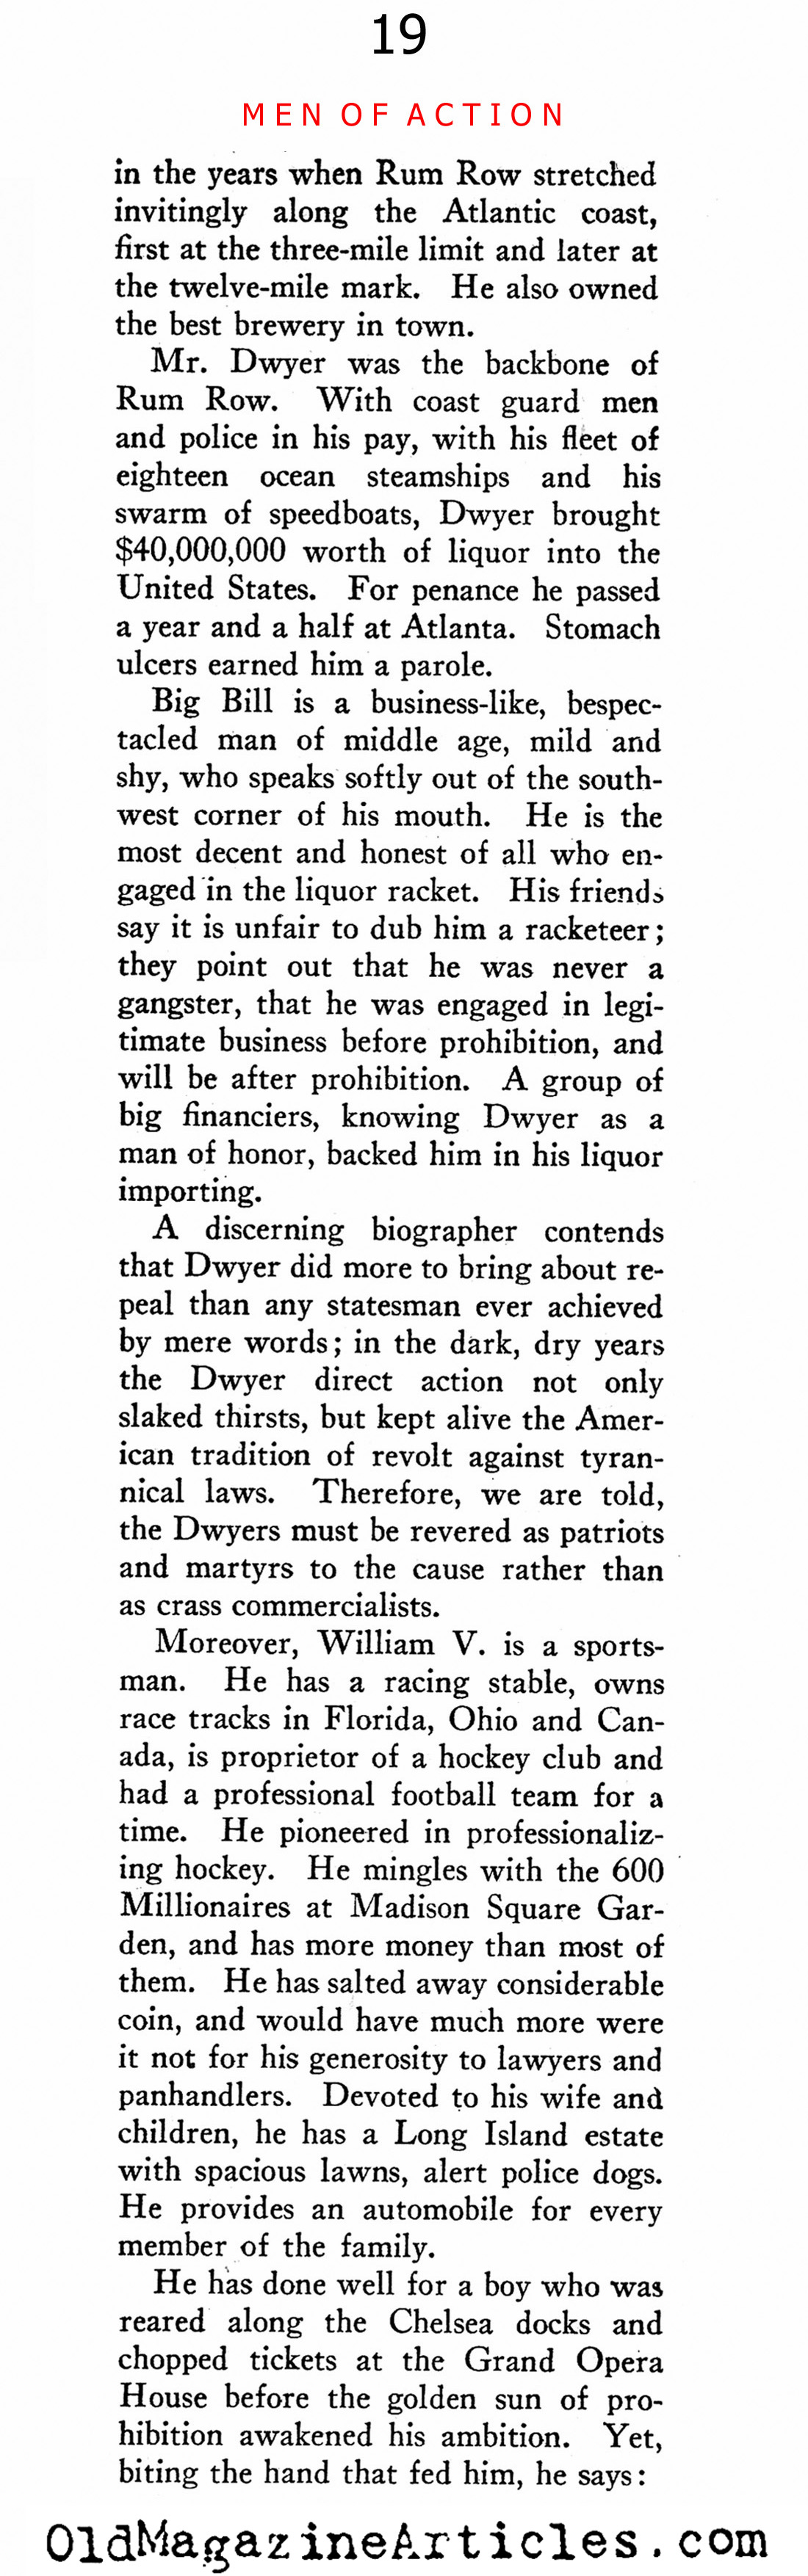 The Mobsters (New Outlook Magazine, 1933)